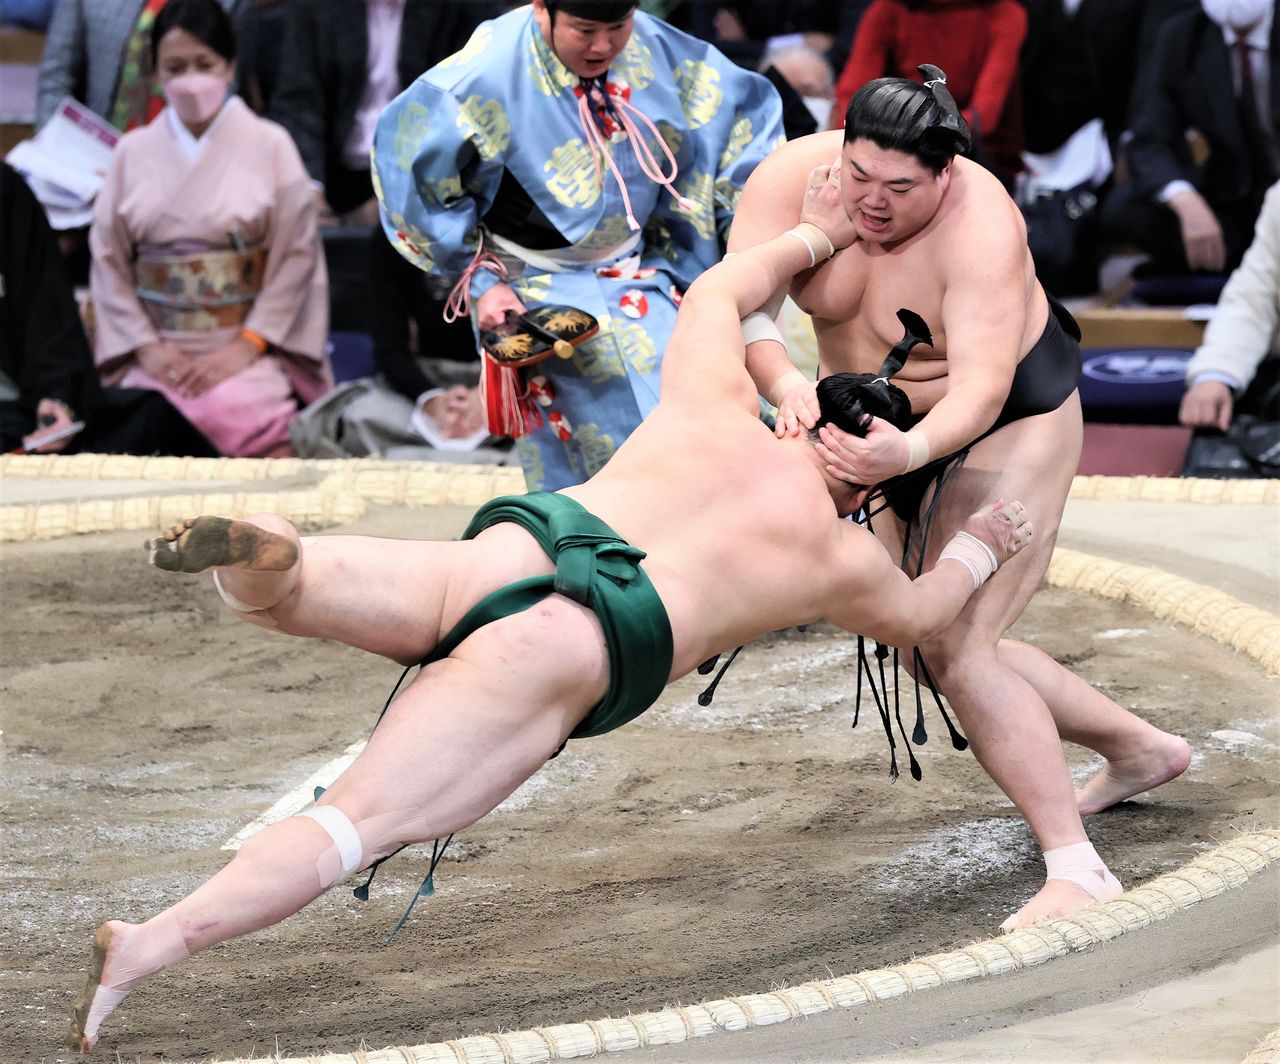 Tokkuri-nage (two-handed head twist-down): Using a pincer motion, Abi (right) grasps Satanoumi’s head and neck in both hands to force him down on the sixth day of the November 2021 basho. The name of this kimarite comes from using one’s thumb and forefinger to grasp the neck of a tokkuri sake flask. © Jiji